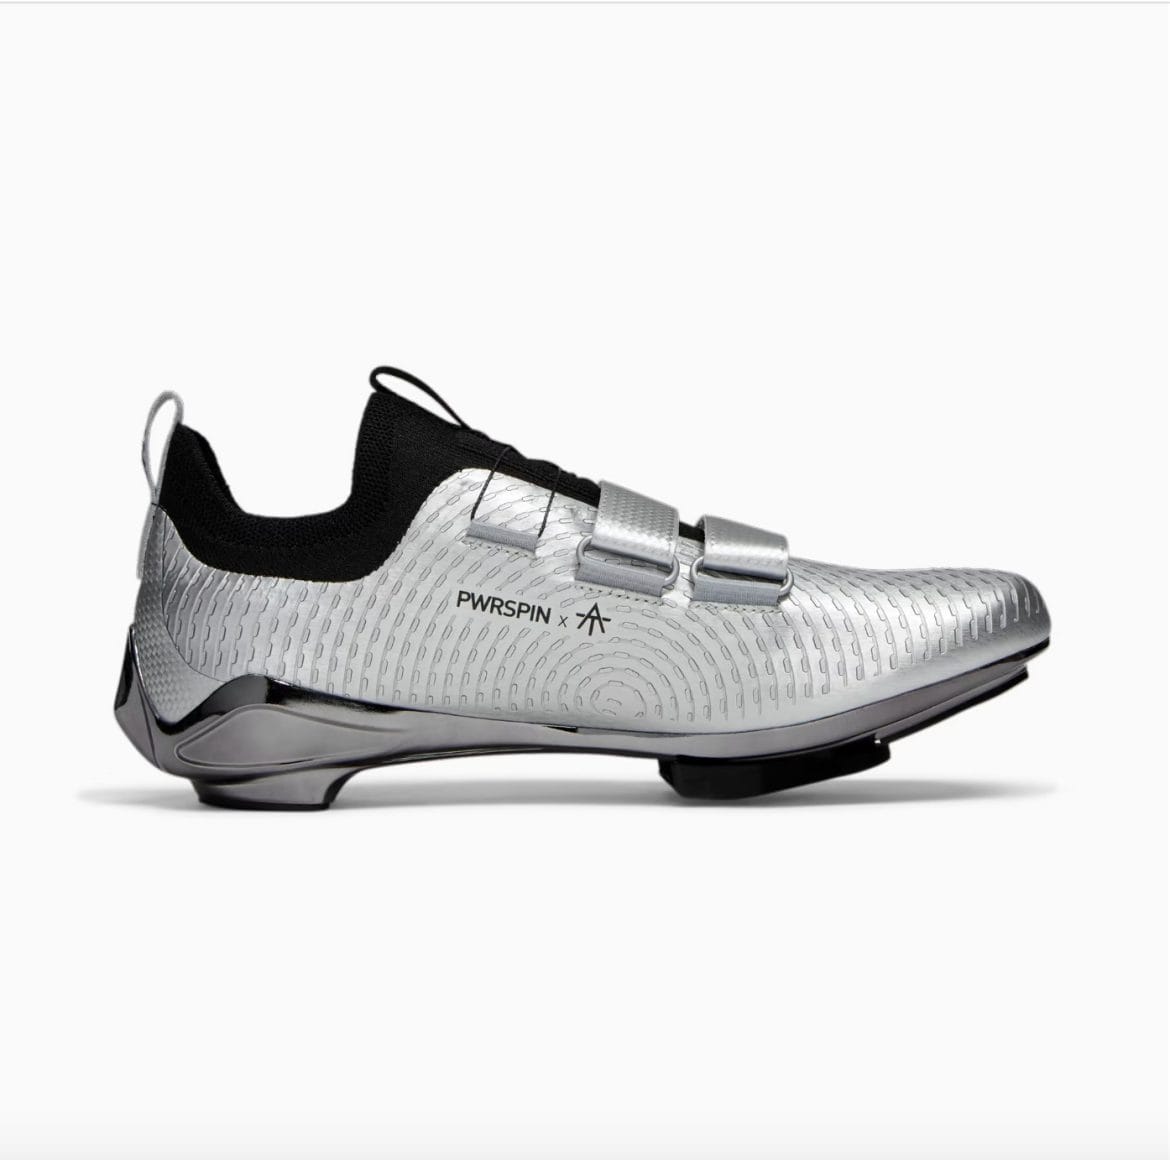 AT X PWRSPIN cycling shoe. Image credit PUMA website.